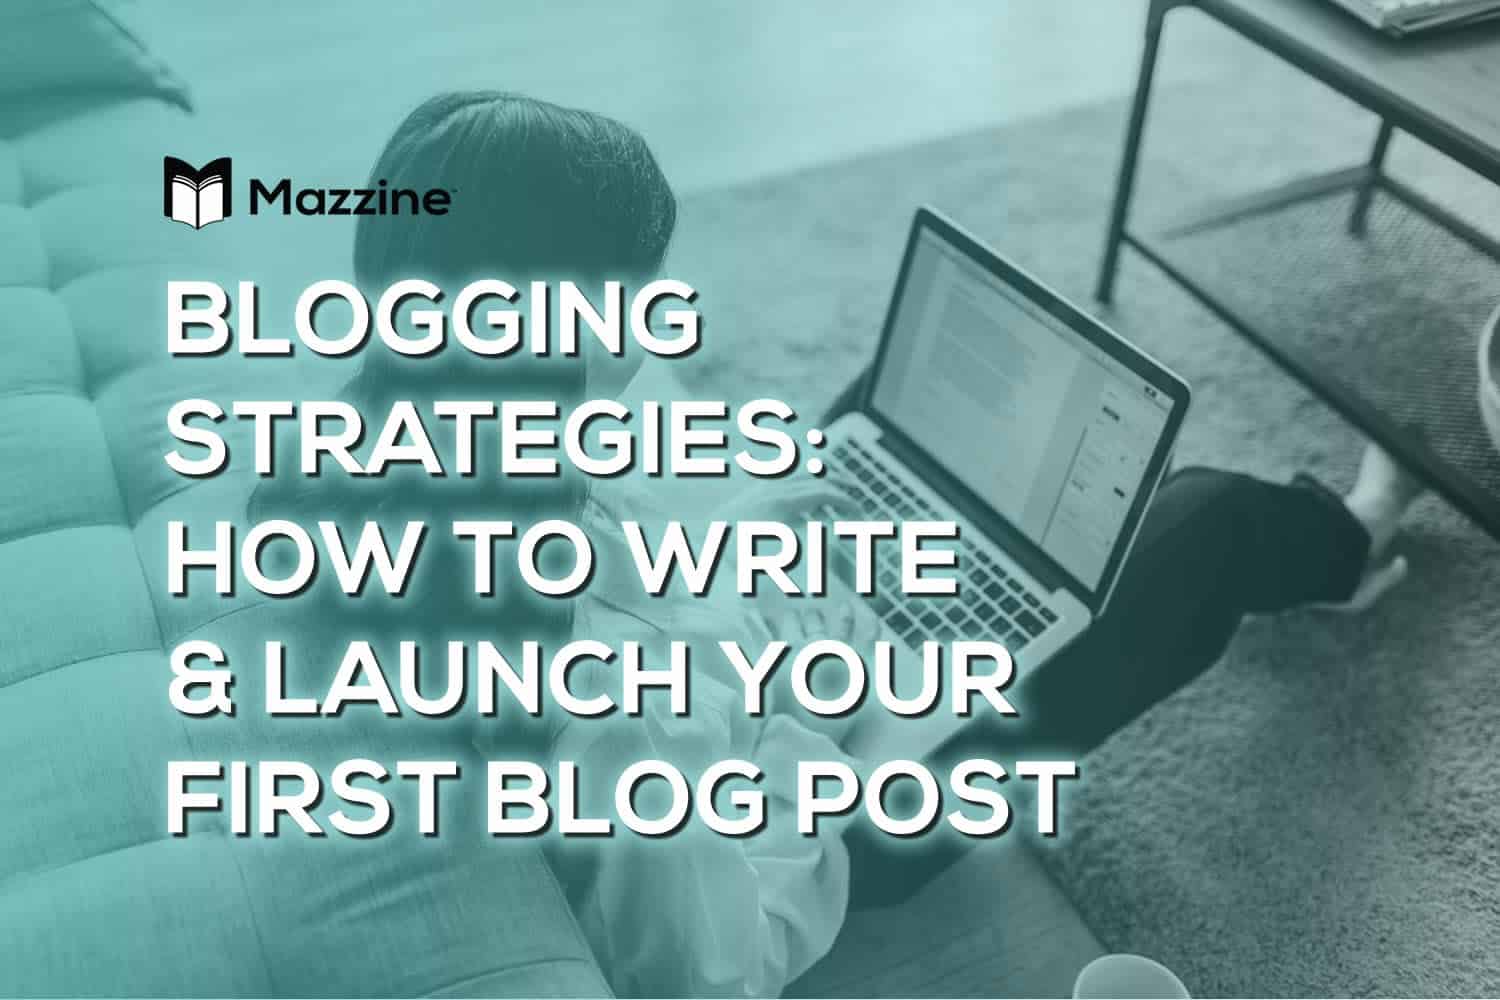 Blogging-Strategies-How-to-Write-Launch-Your-First-Blog-Post